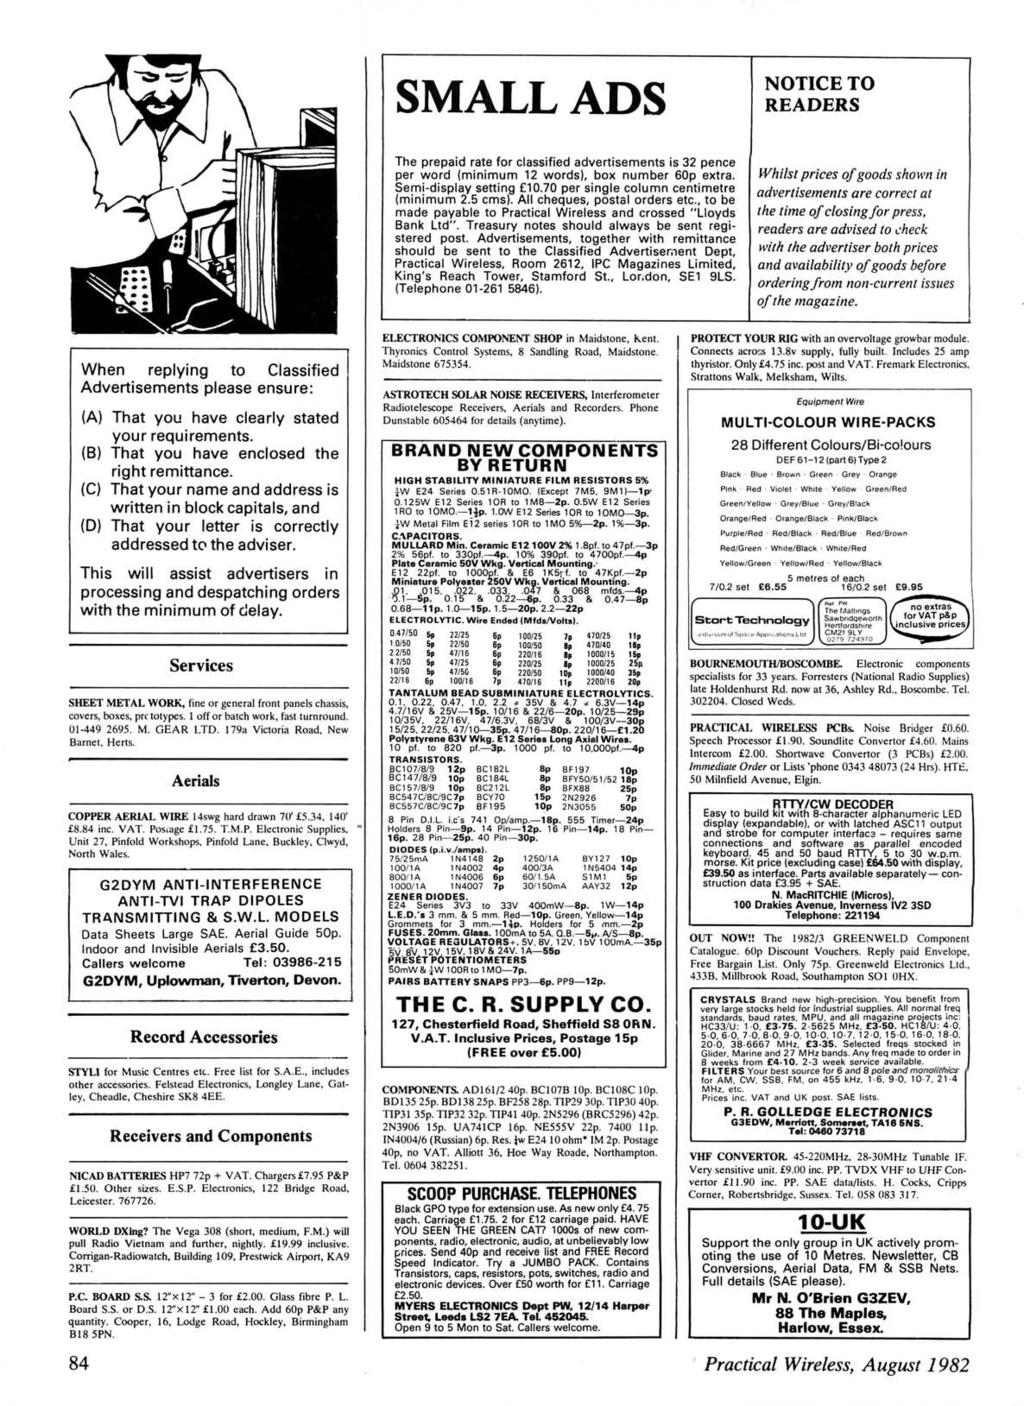 www.americanradiohistory.com SMALL ADS NOTCE TO READERS The prepaid rate for classified advertisements is 32 pence per word (minimum 12 words), box number 60p extra. Semi-display setting 10.